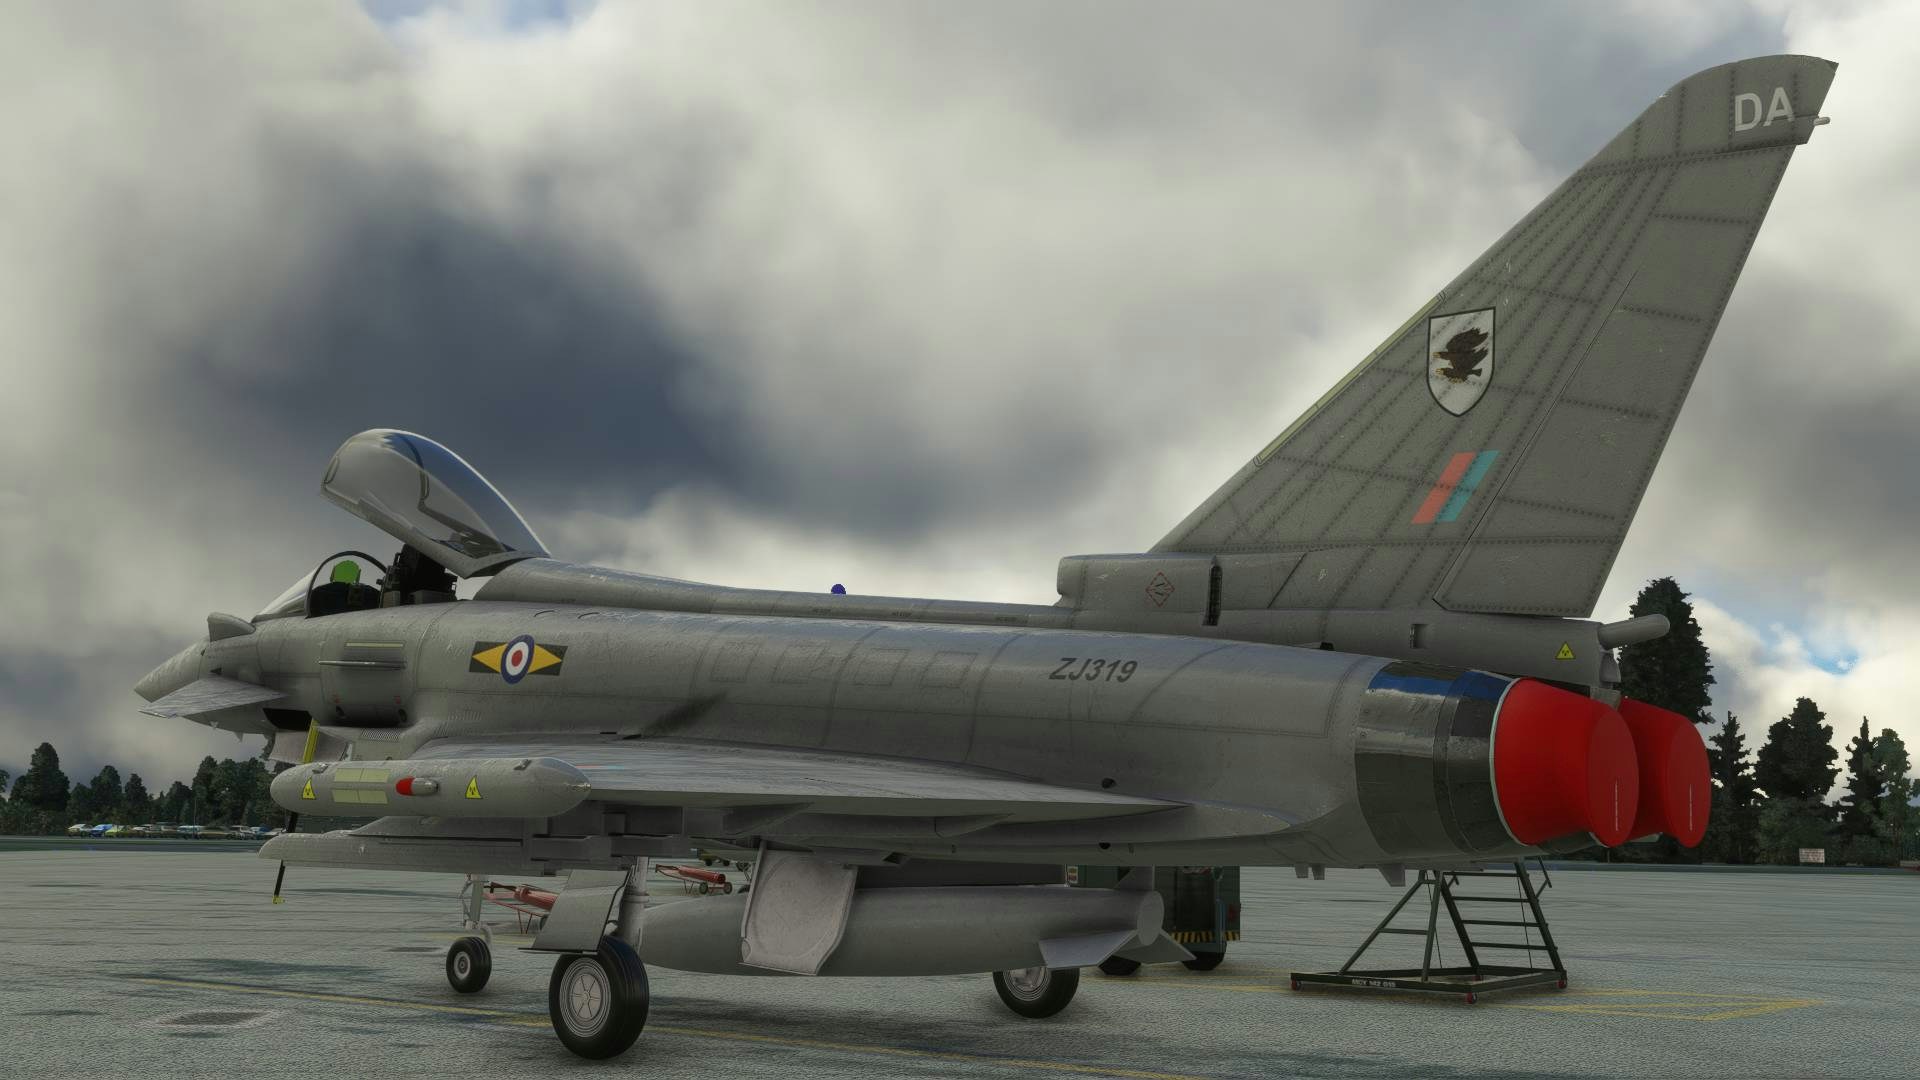 CJ Simulations Releases the Eurofighter Typhoon in MSFS